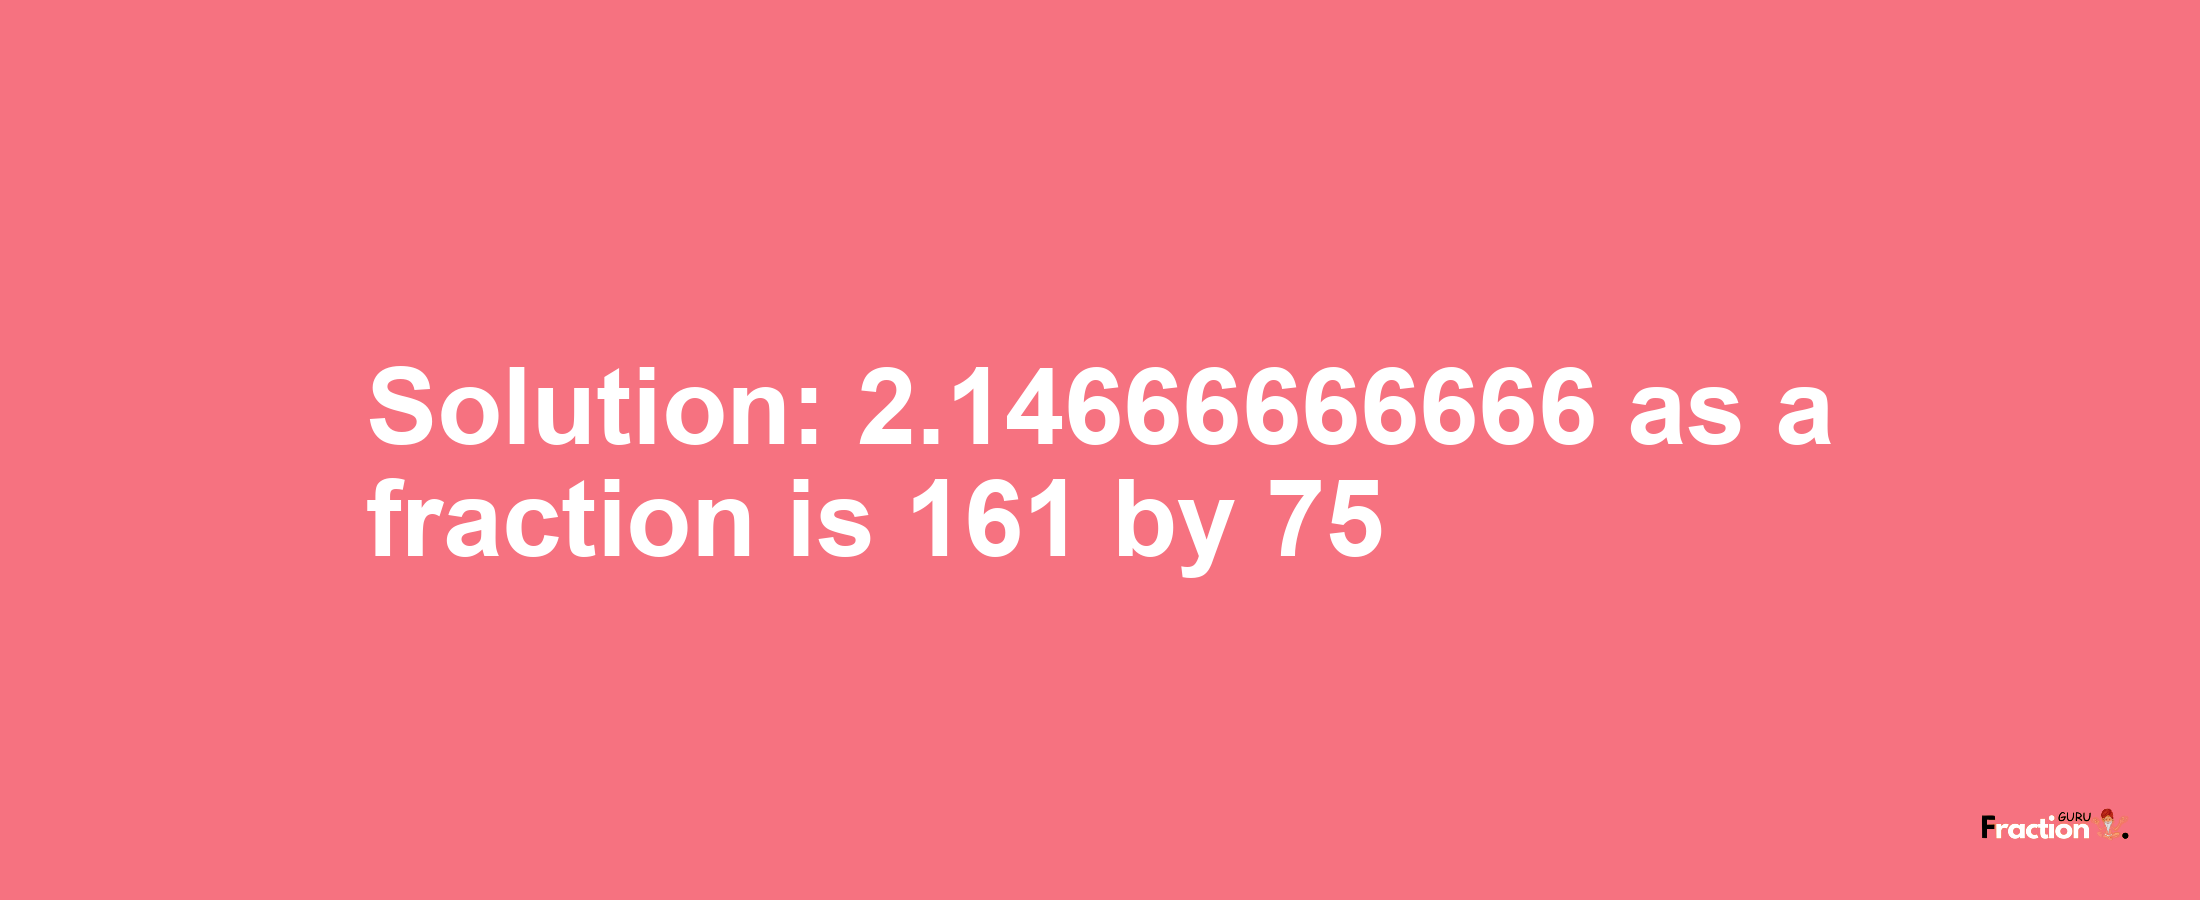 Solution:2.14666666666 as a fraction is 161/75